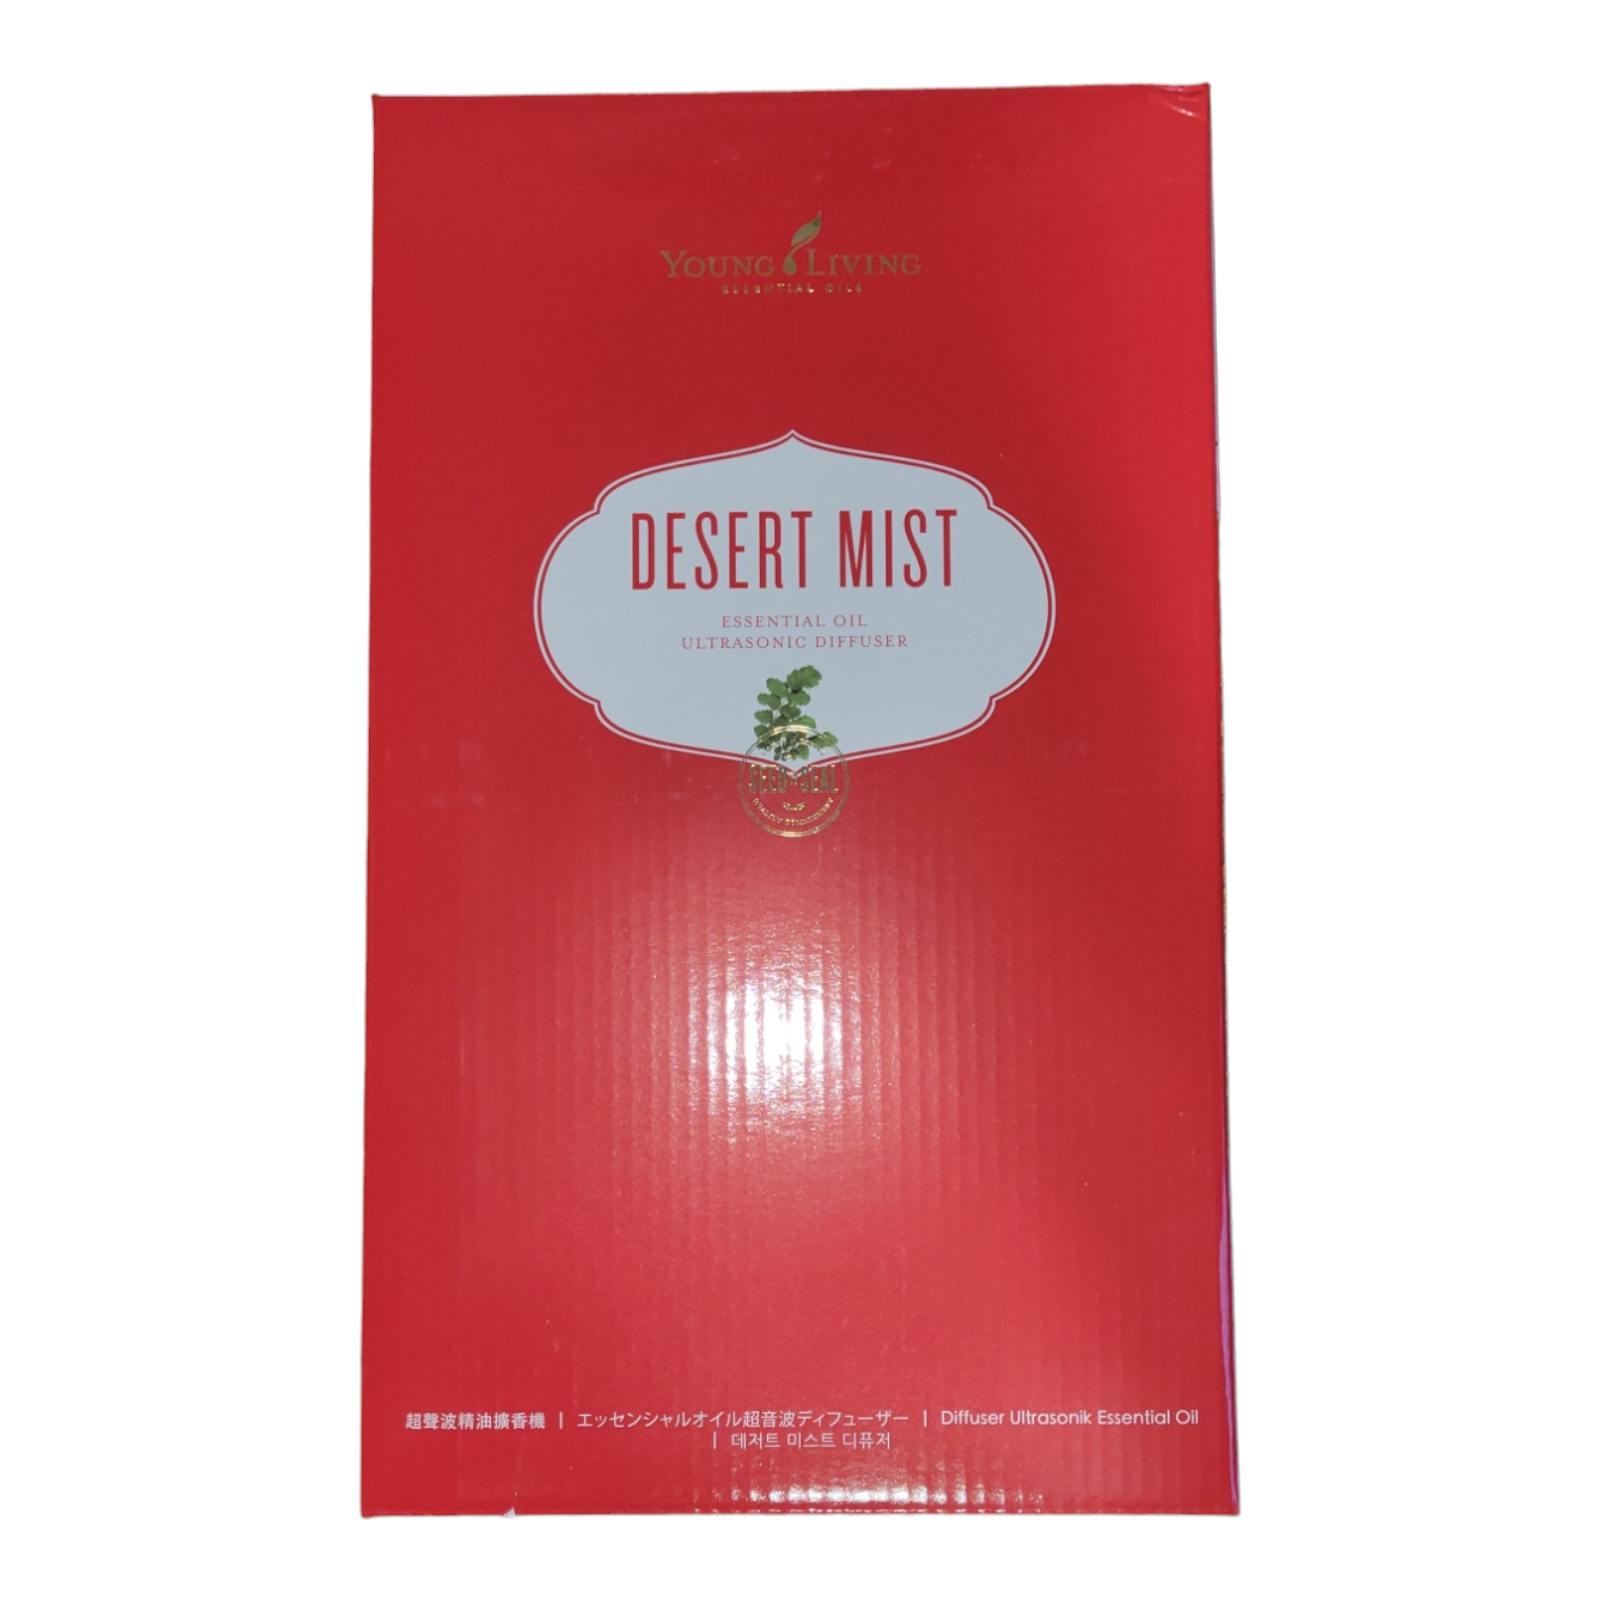 Young Living Dessert Mist Diffuser - New - Free Shipping - $40.00